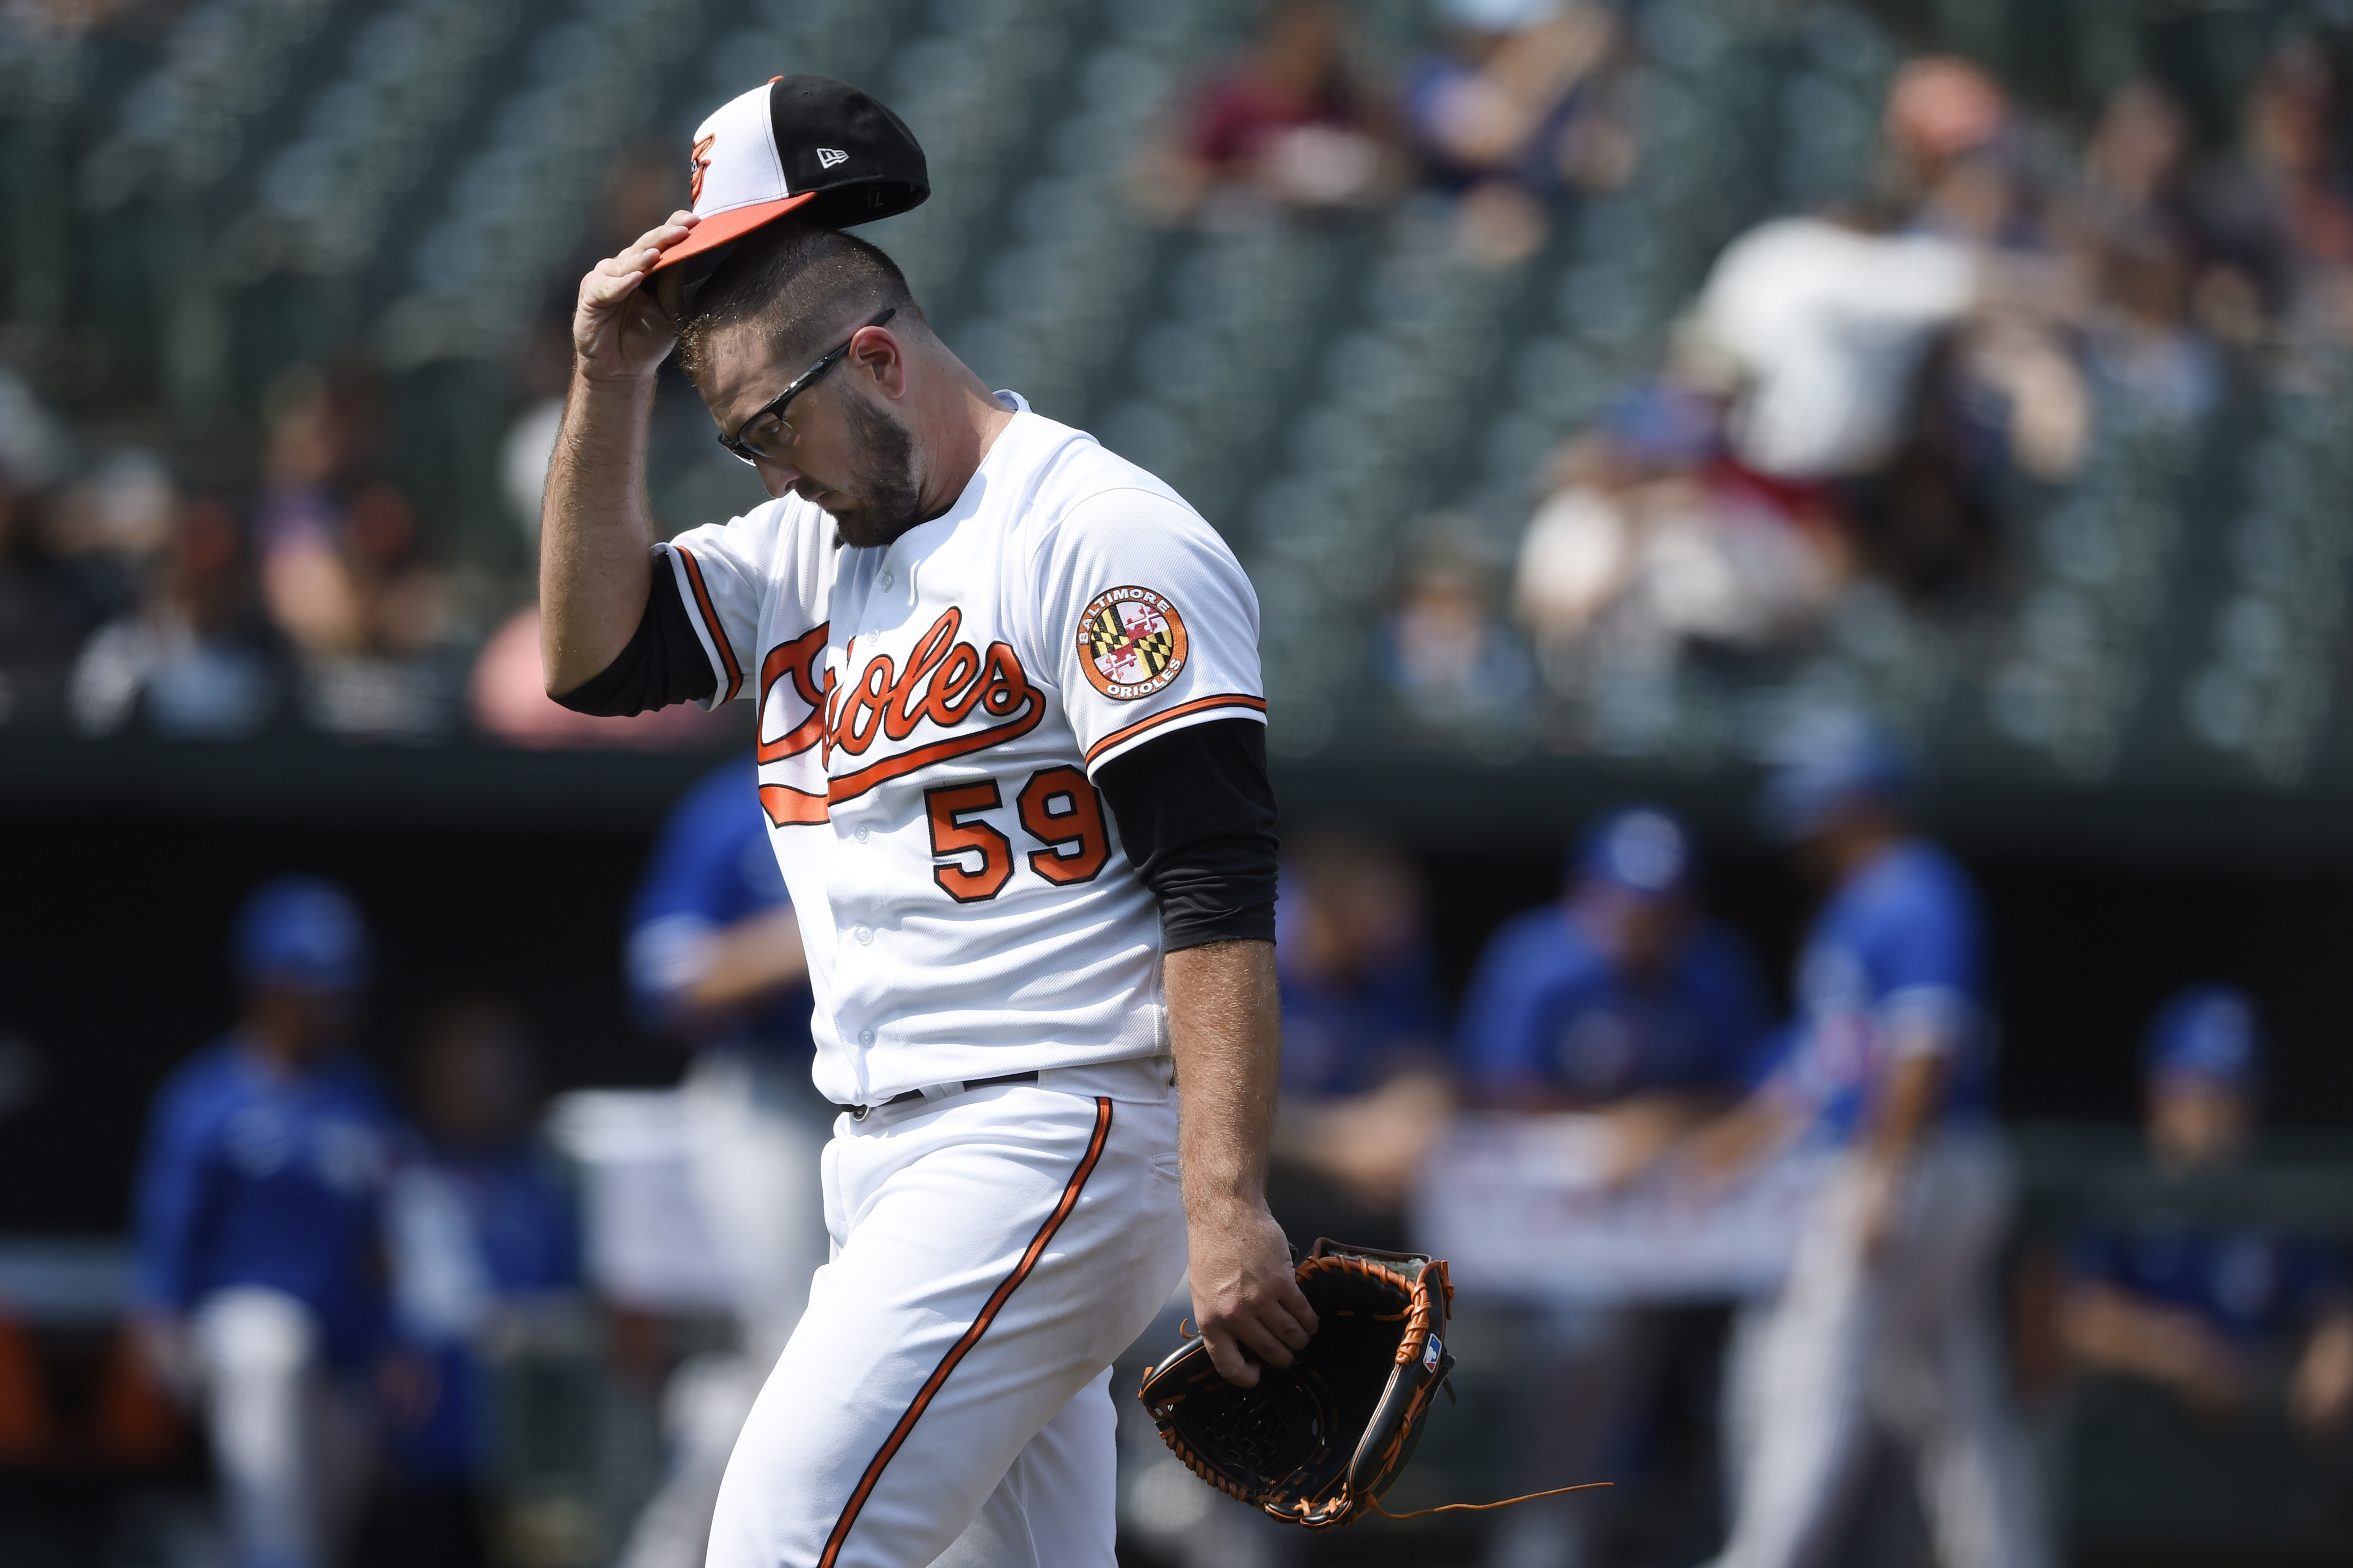 Orioles complete first sweep of Blue Jays in Toronto since 2005